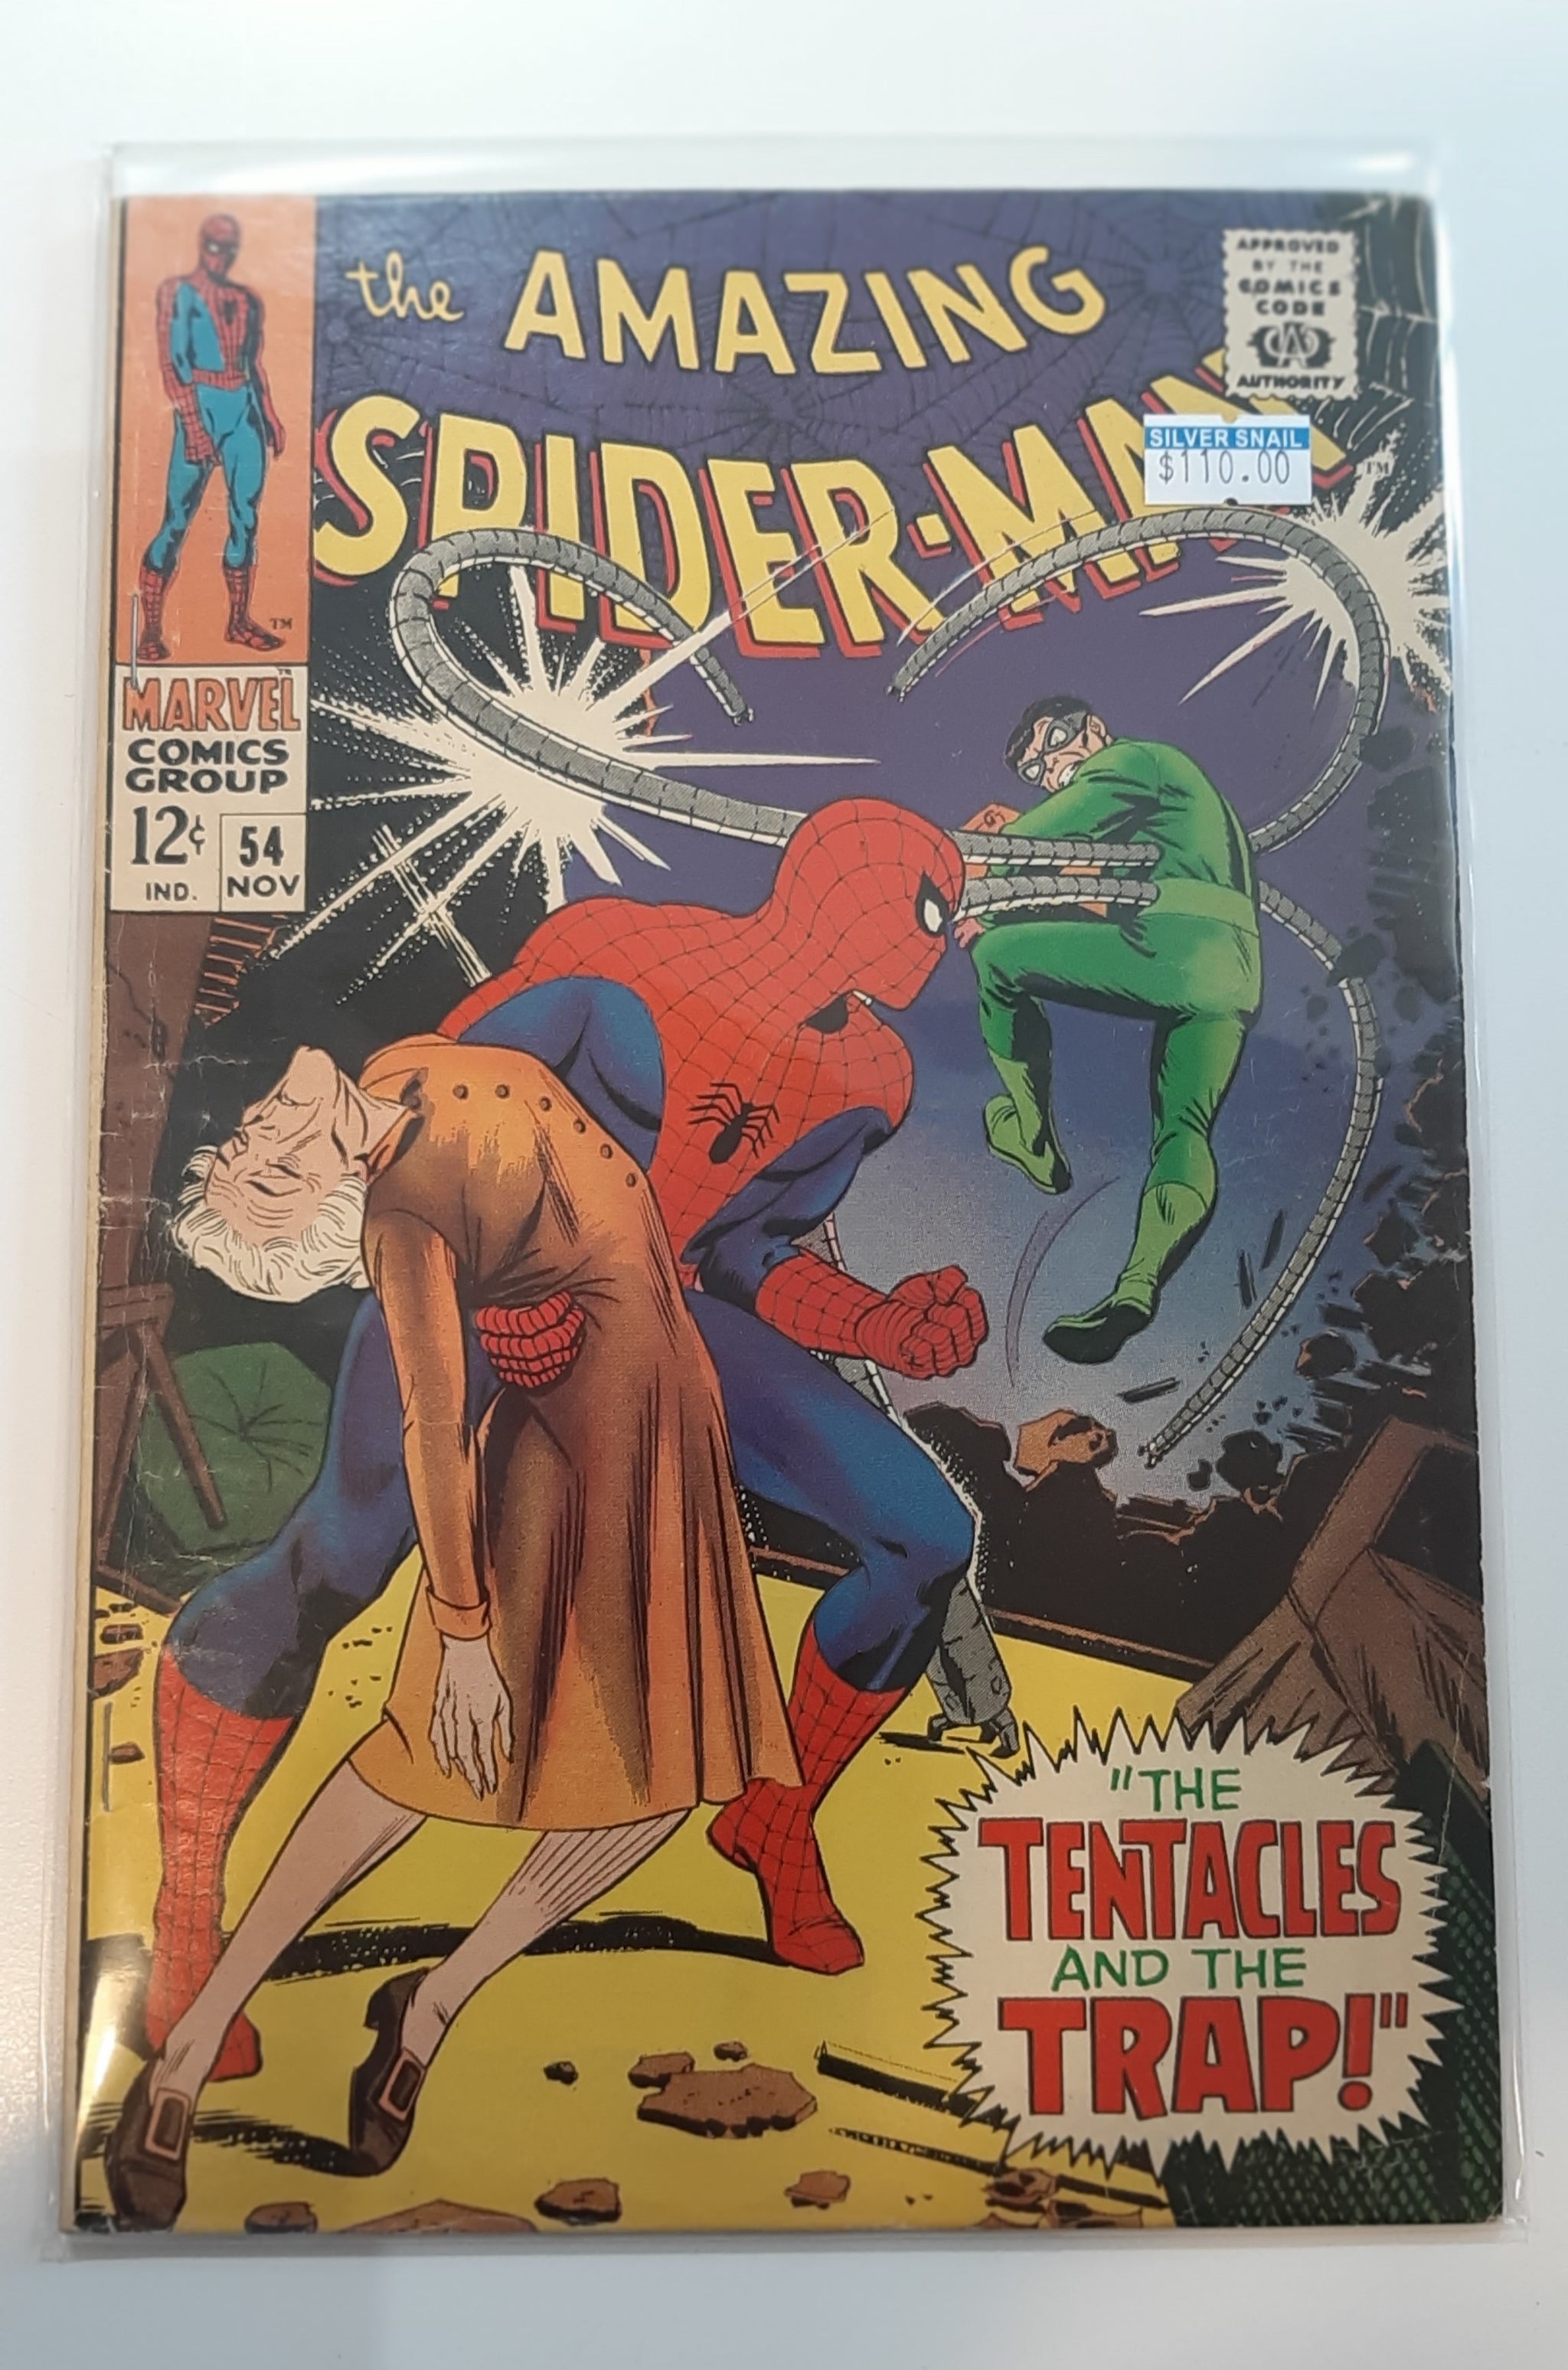 The Amazing Spider-Man #54 - Silver Snail